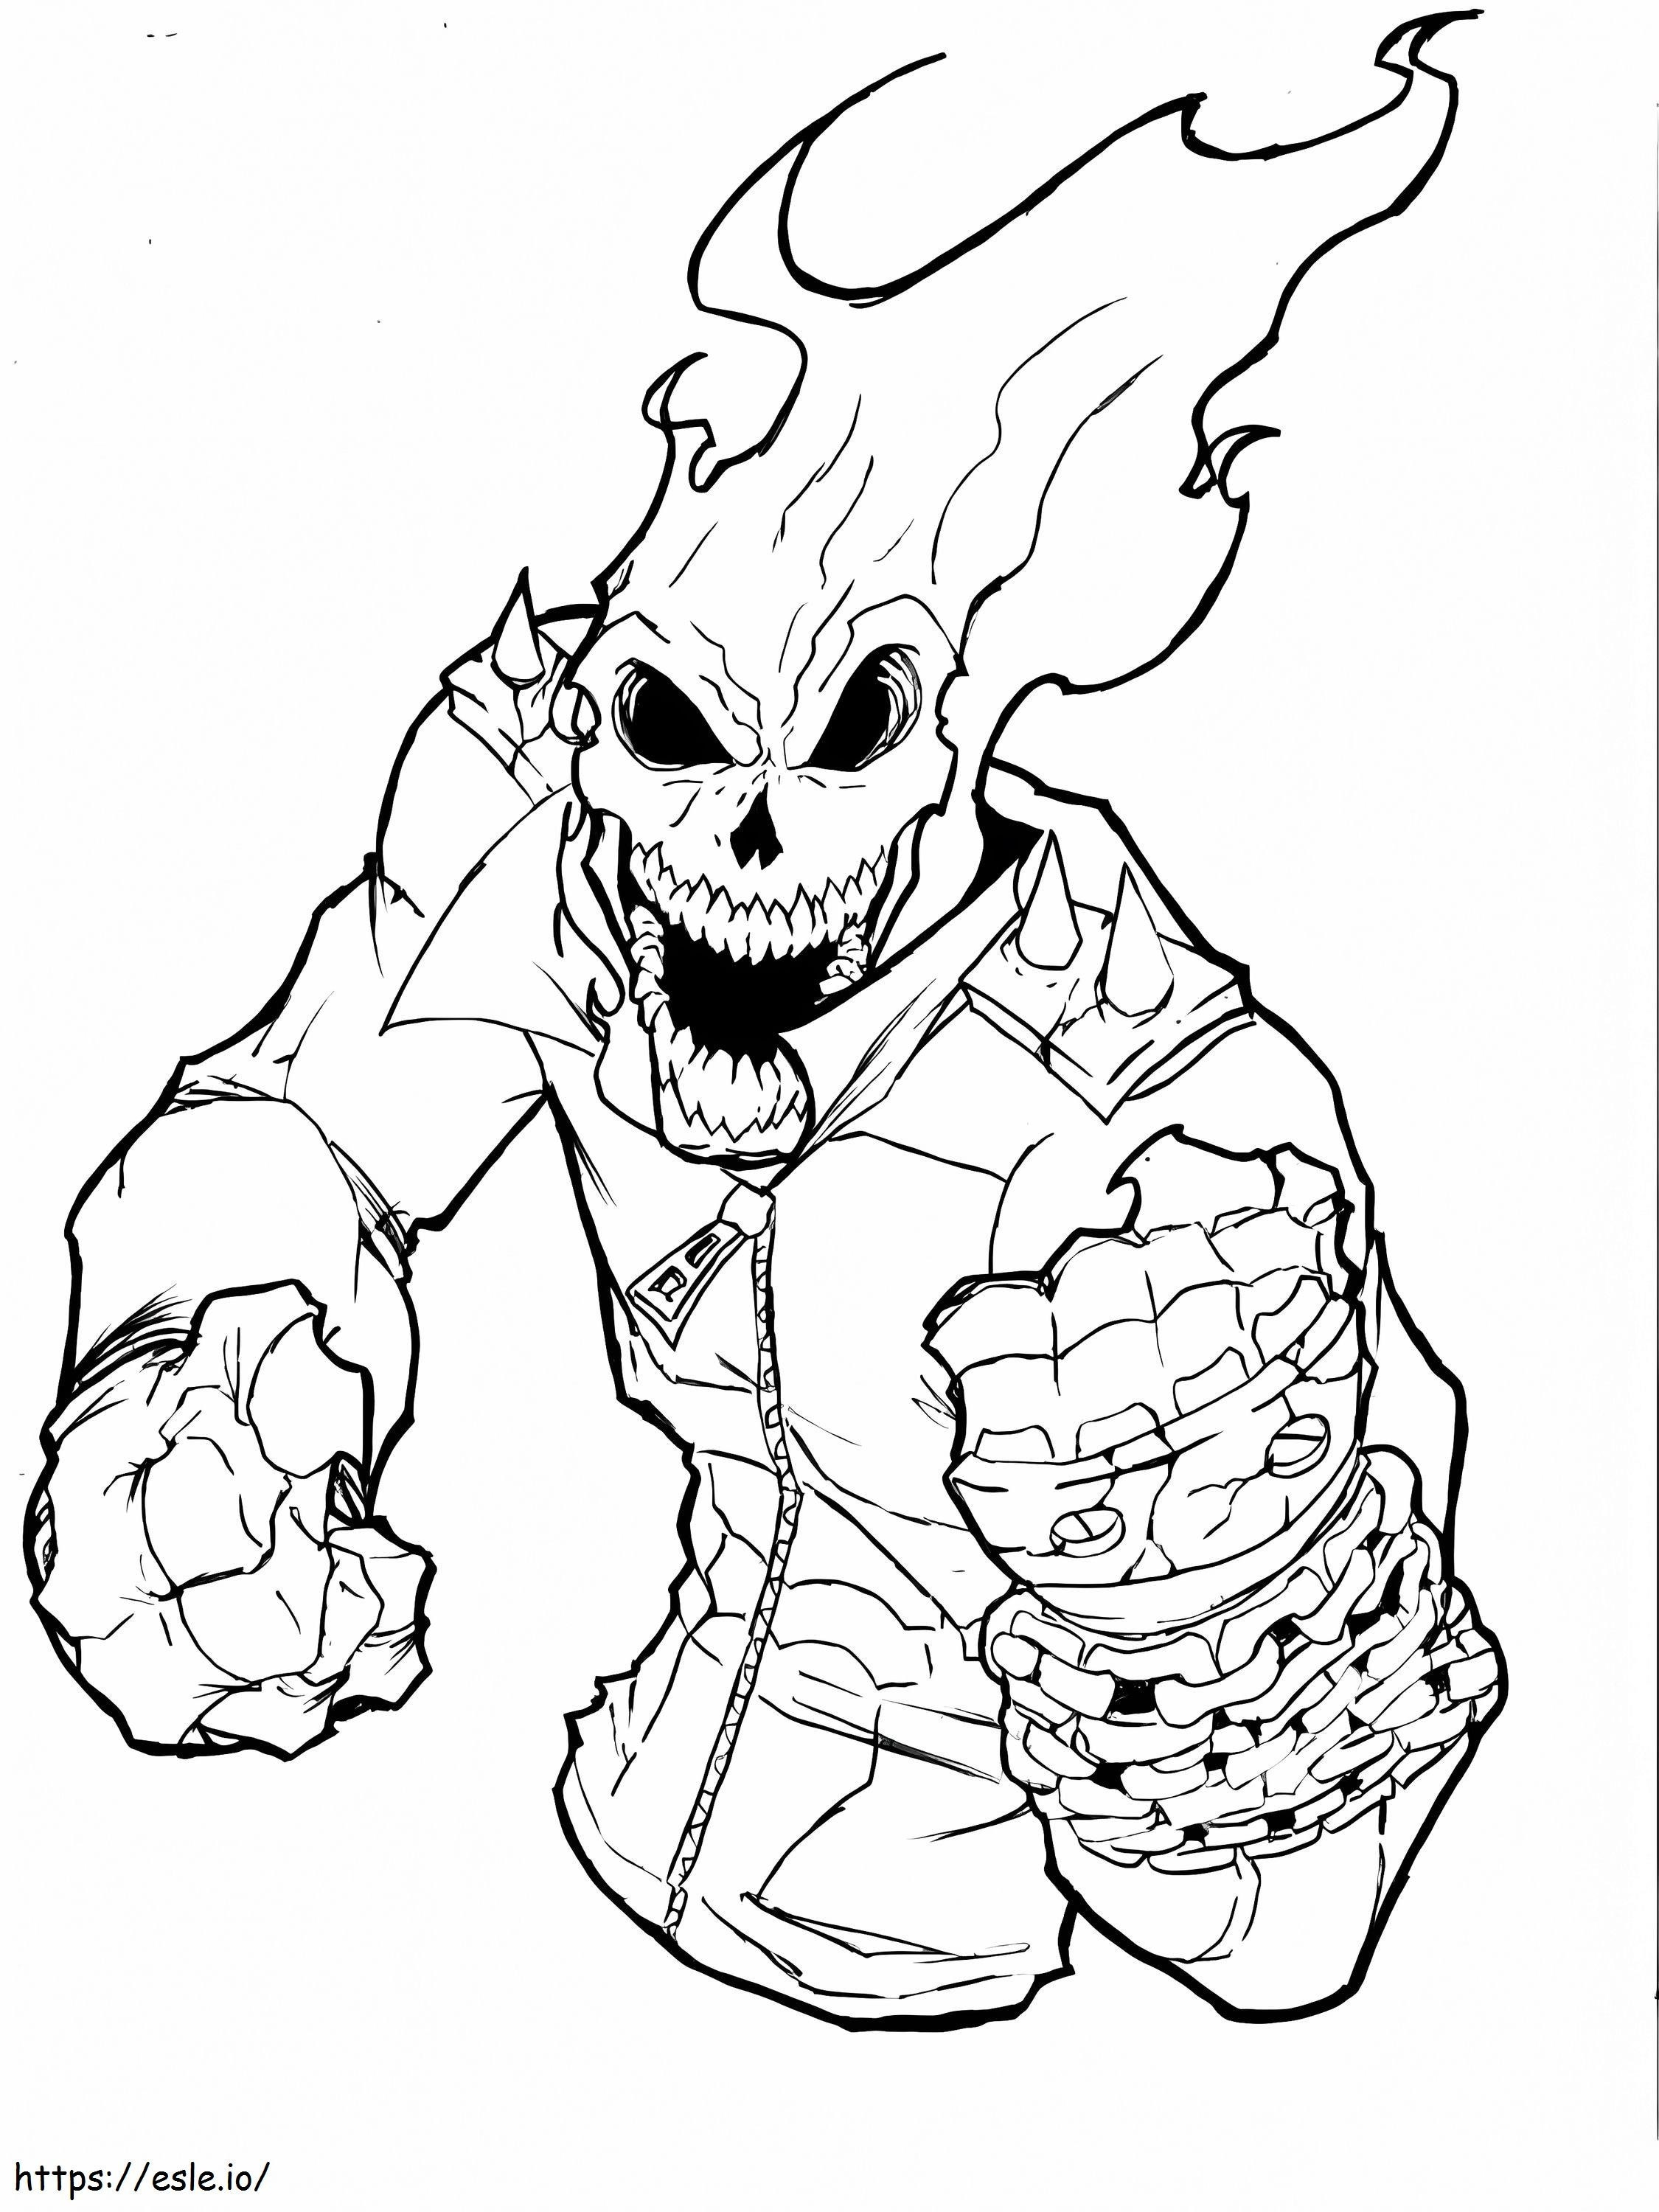 Angry Ghost Rider coloring page